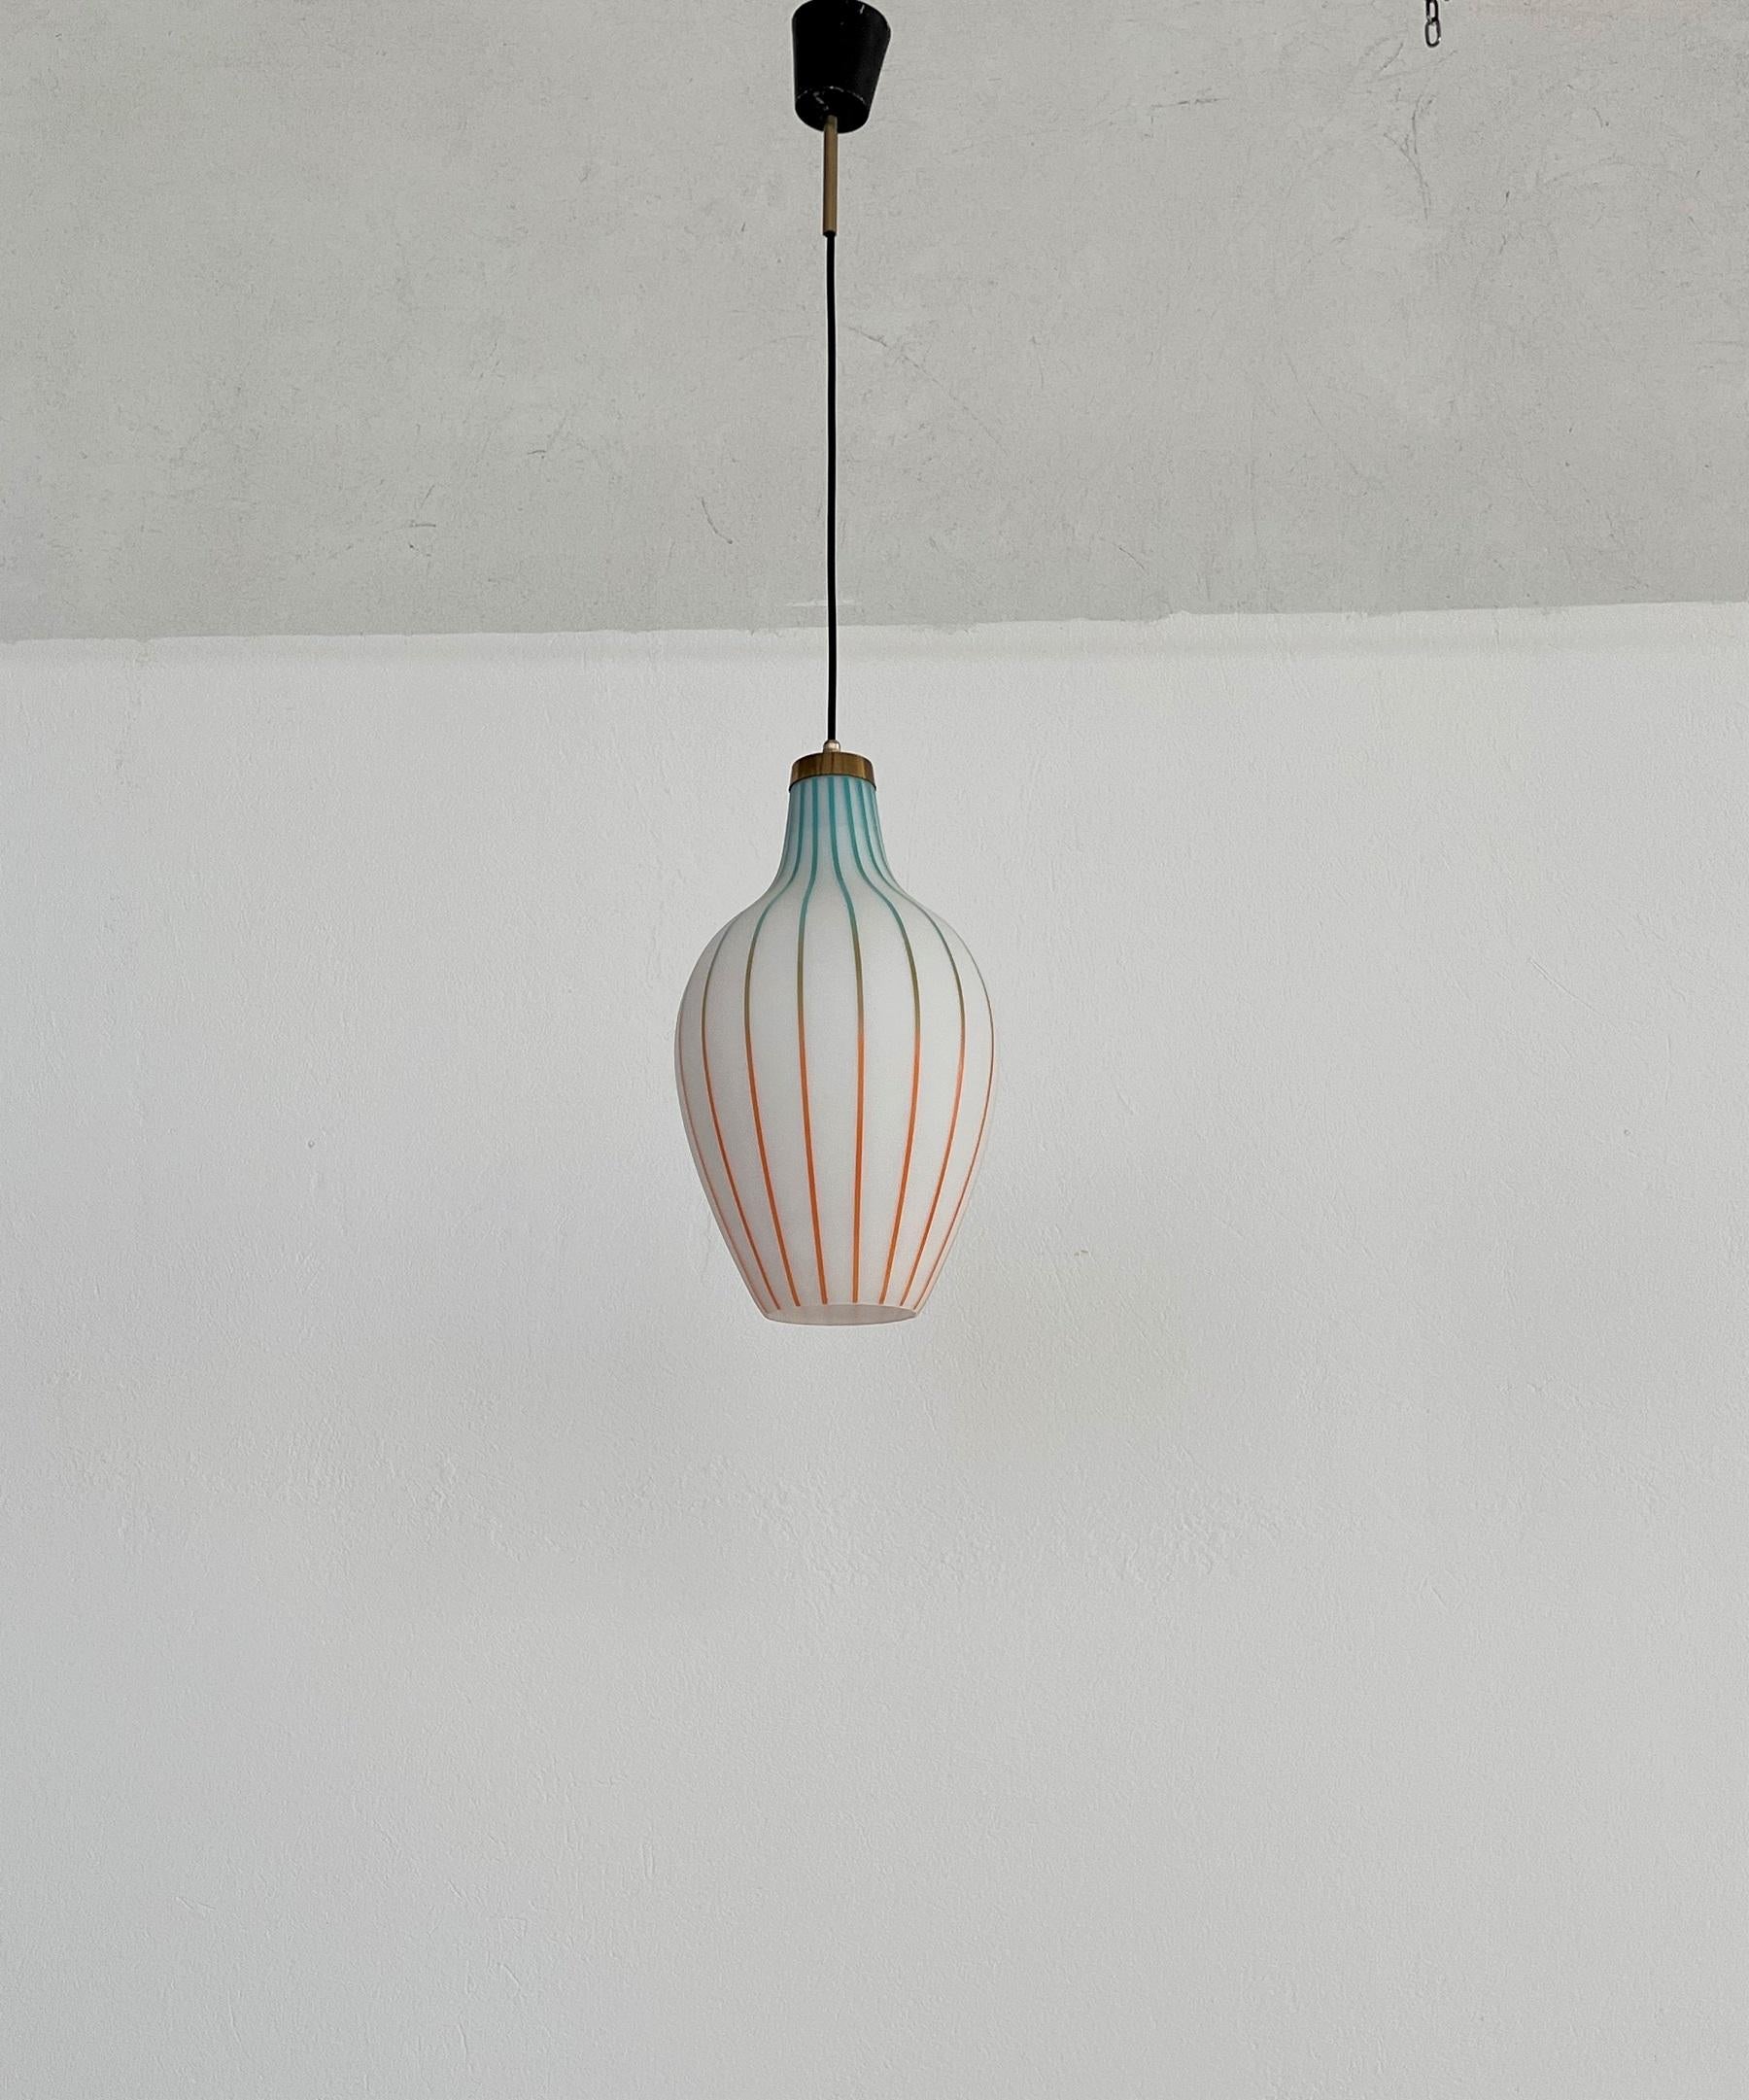 Italian MidCentury Pendant Light with Murano Glass in Massimo Vignelli Style 60s For Sale 2